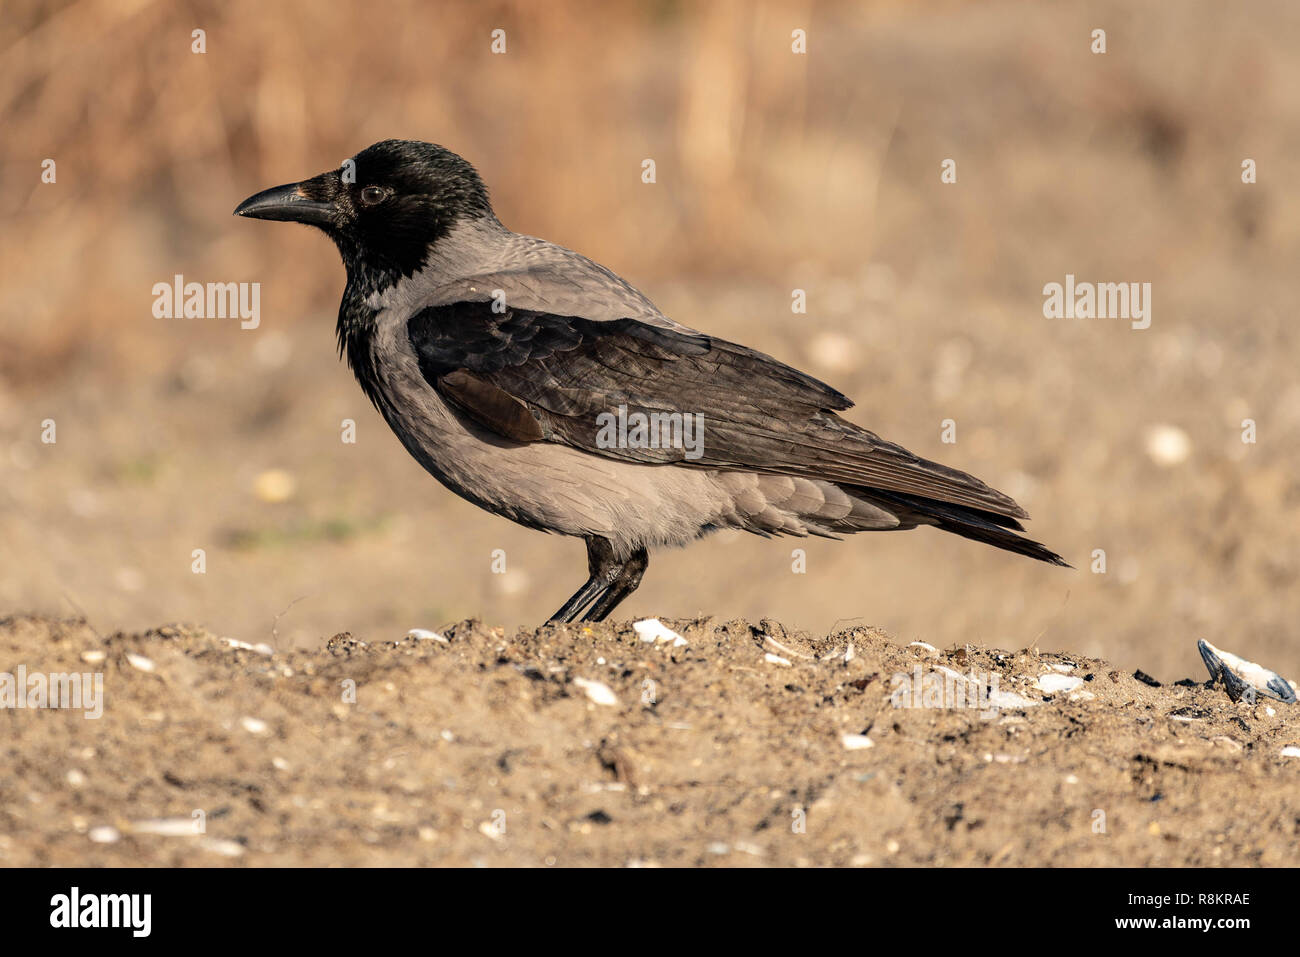 Hooded Crow Stands on Ground Stock Photo